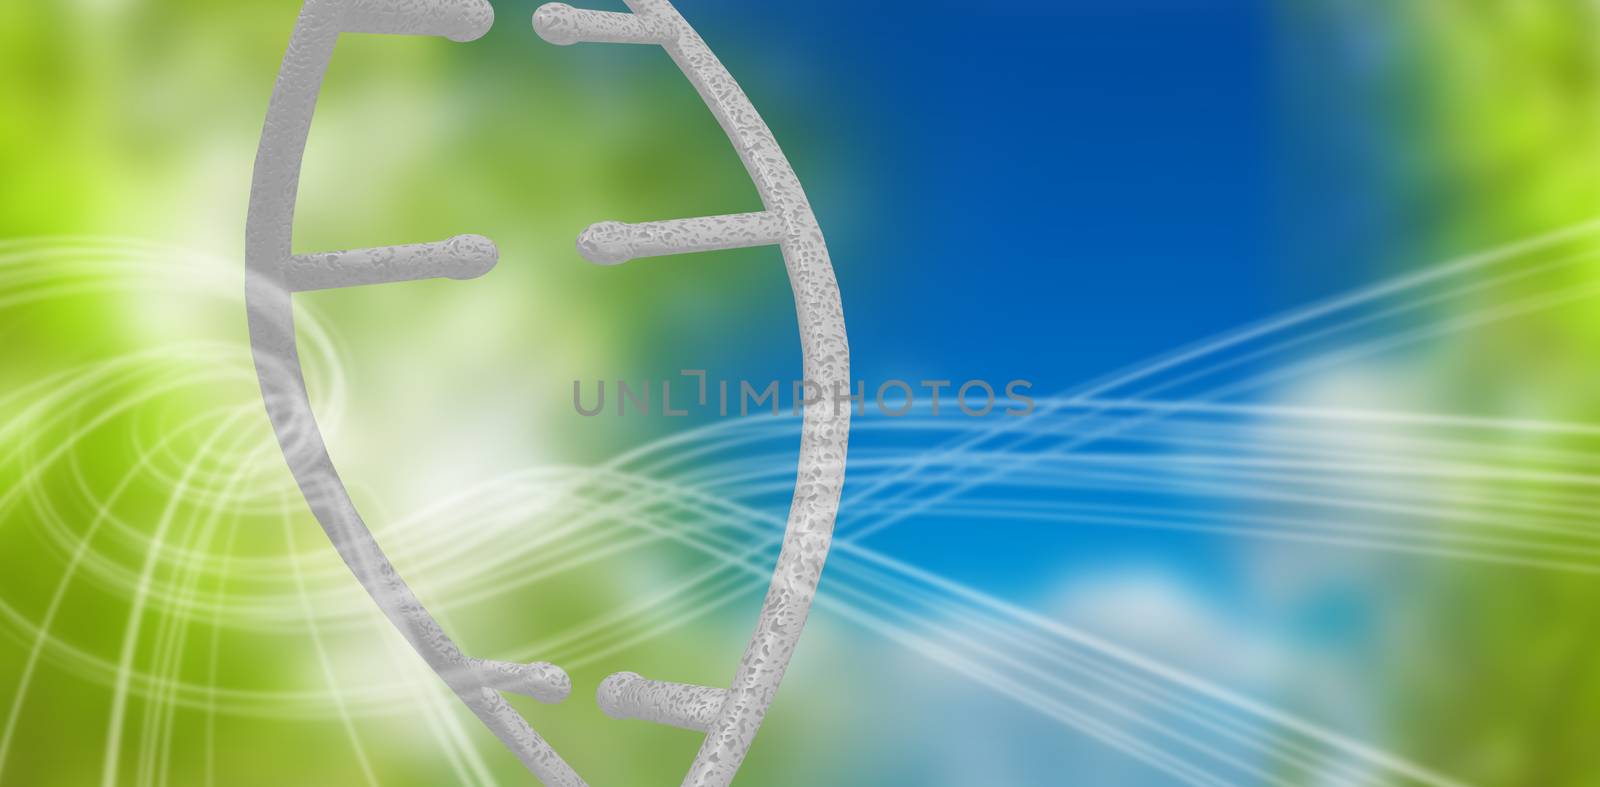 3d Image of dna helix against blue and green background with shiny lines